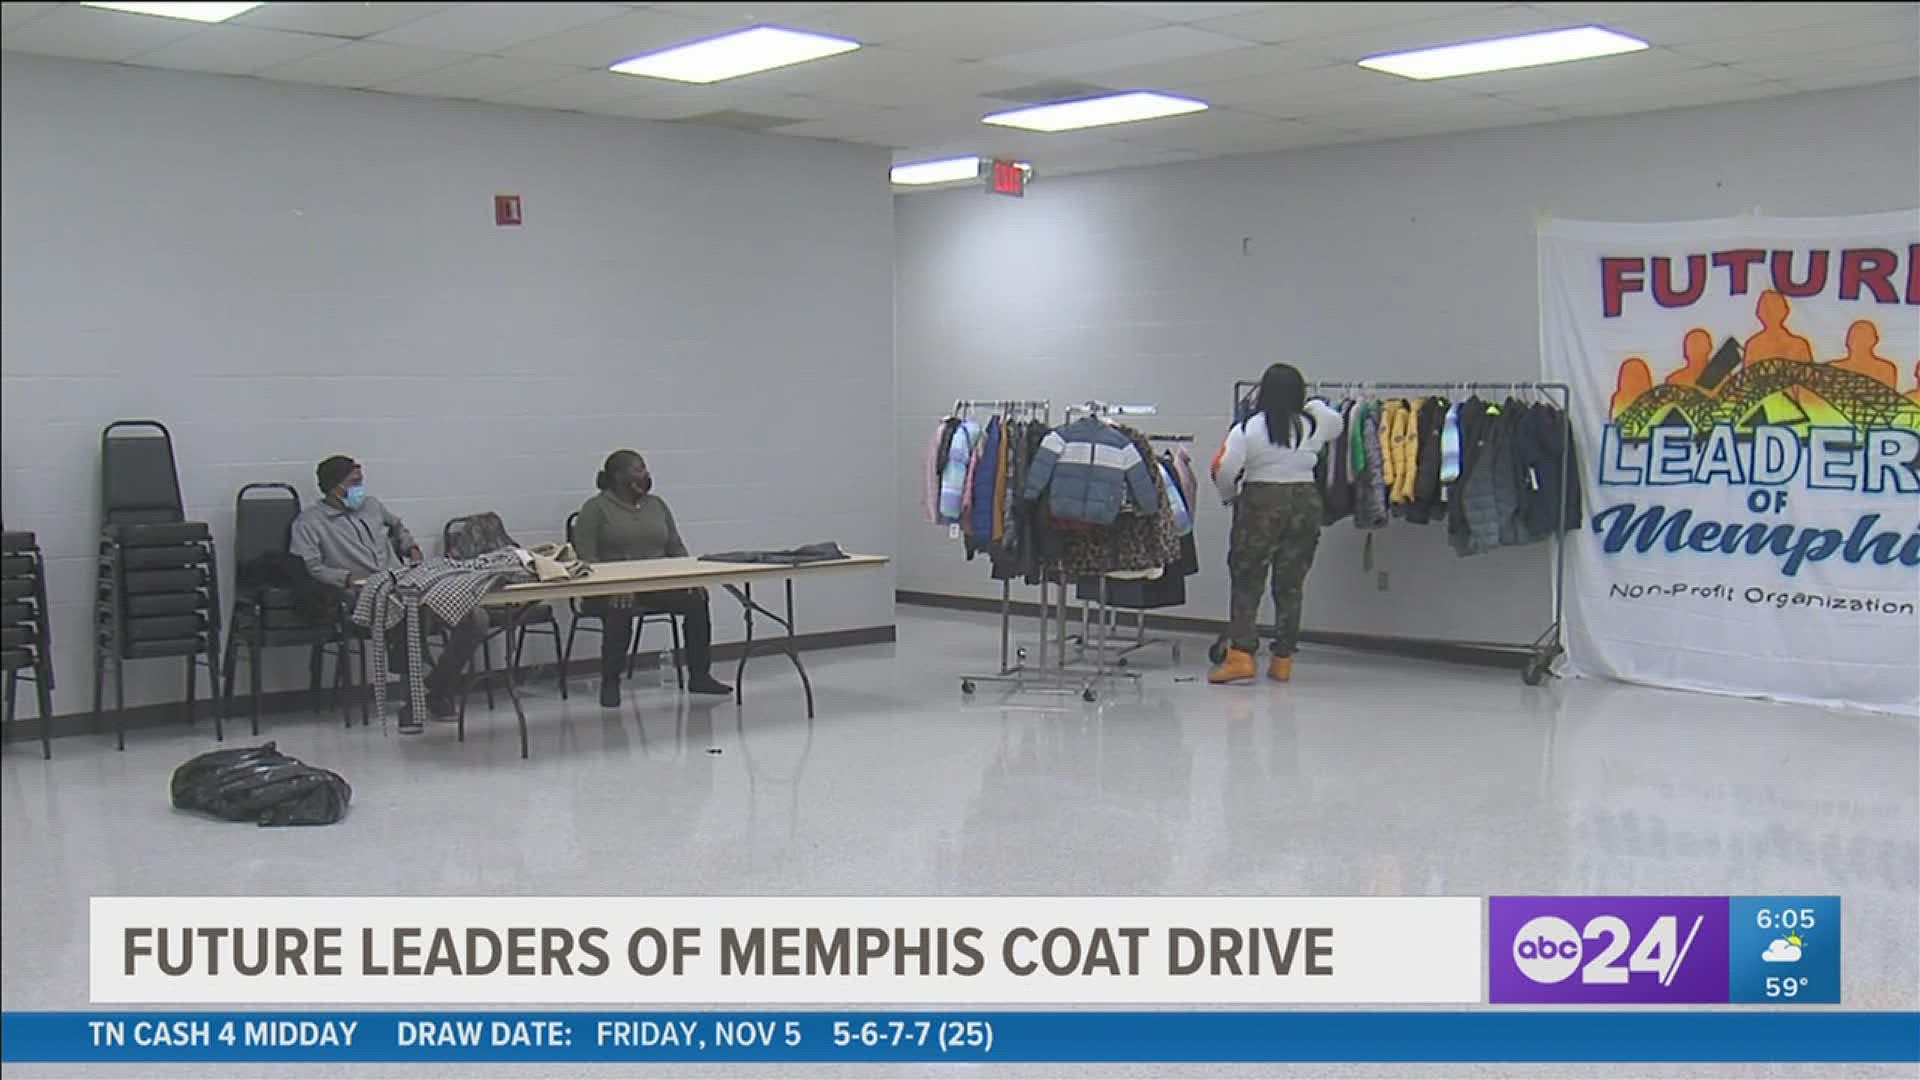 The group gave out free coats on Friday to families with kids who need them.